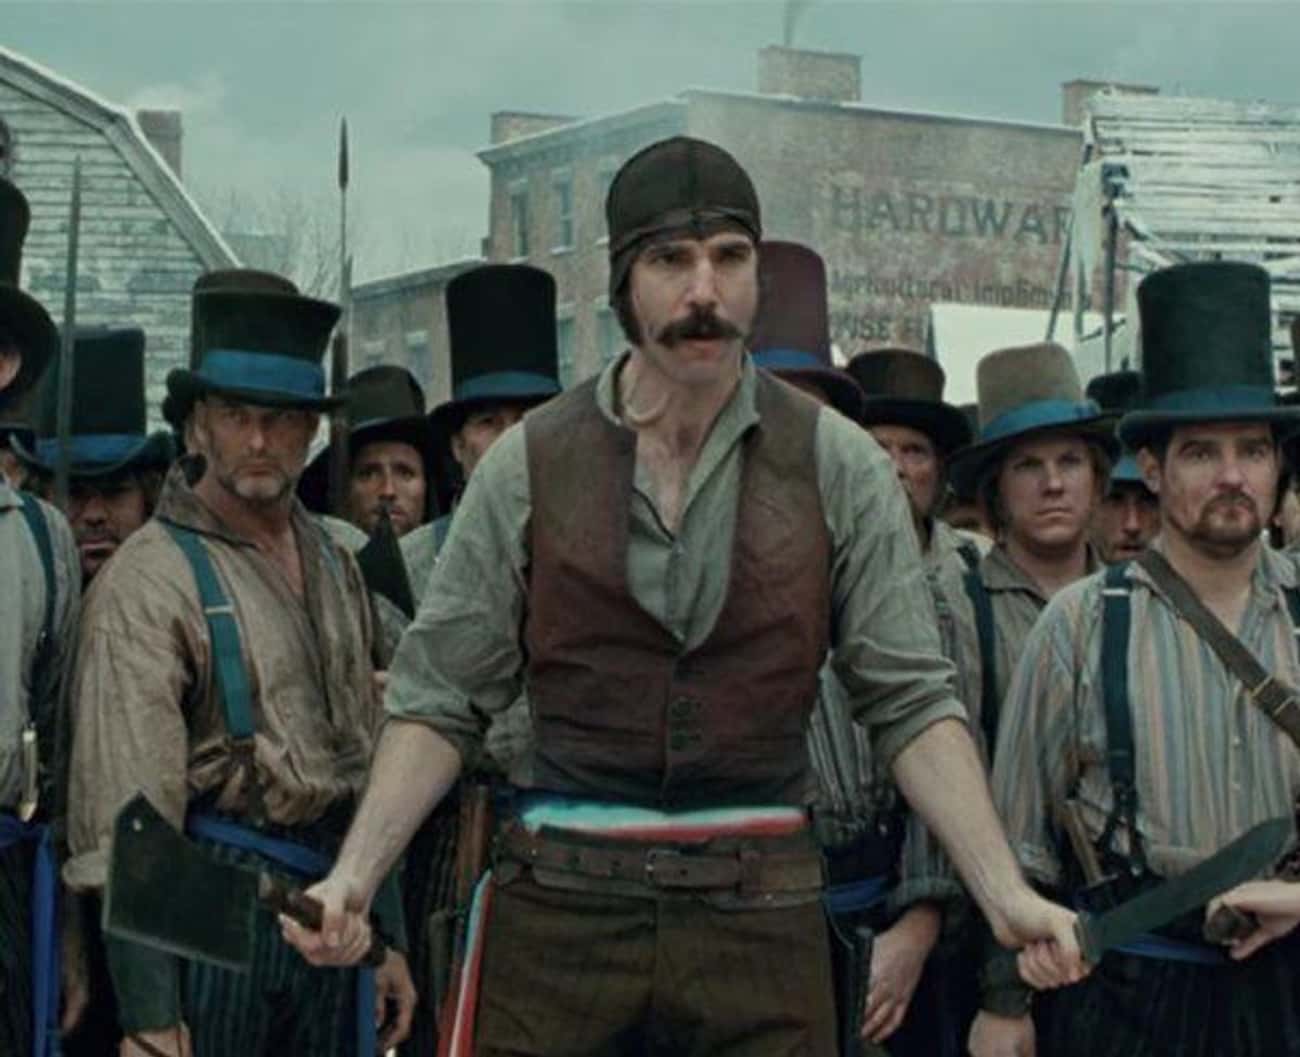 Bill The Butcher In 'Gangs of New York'